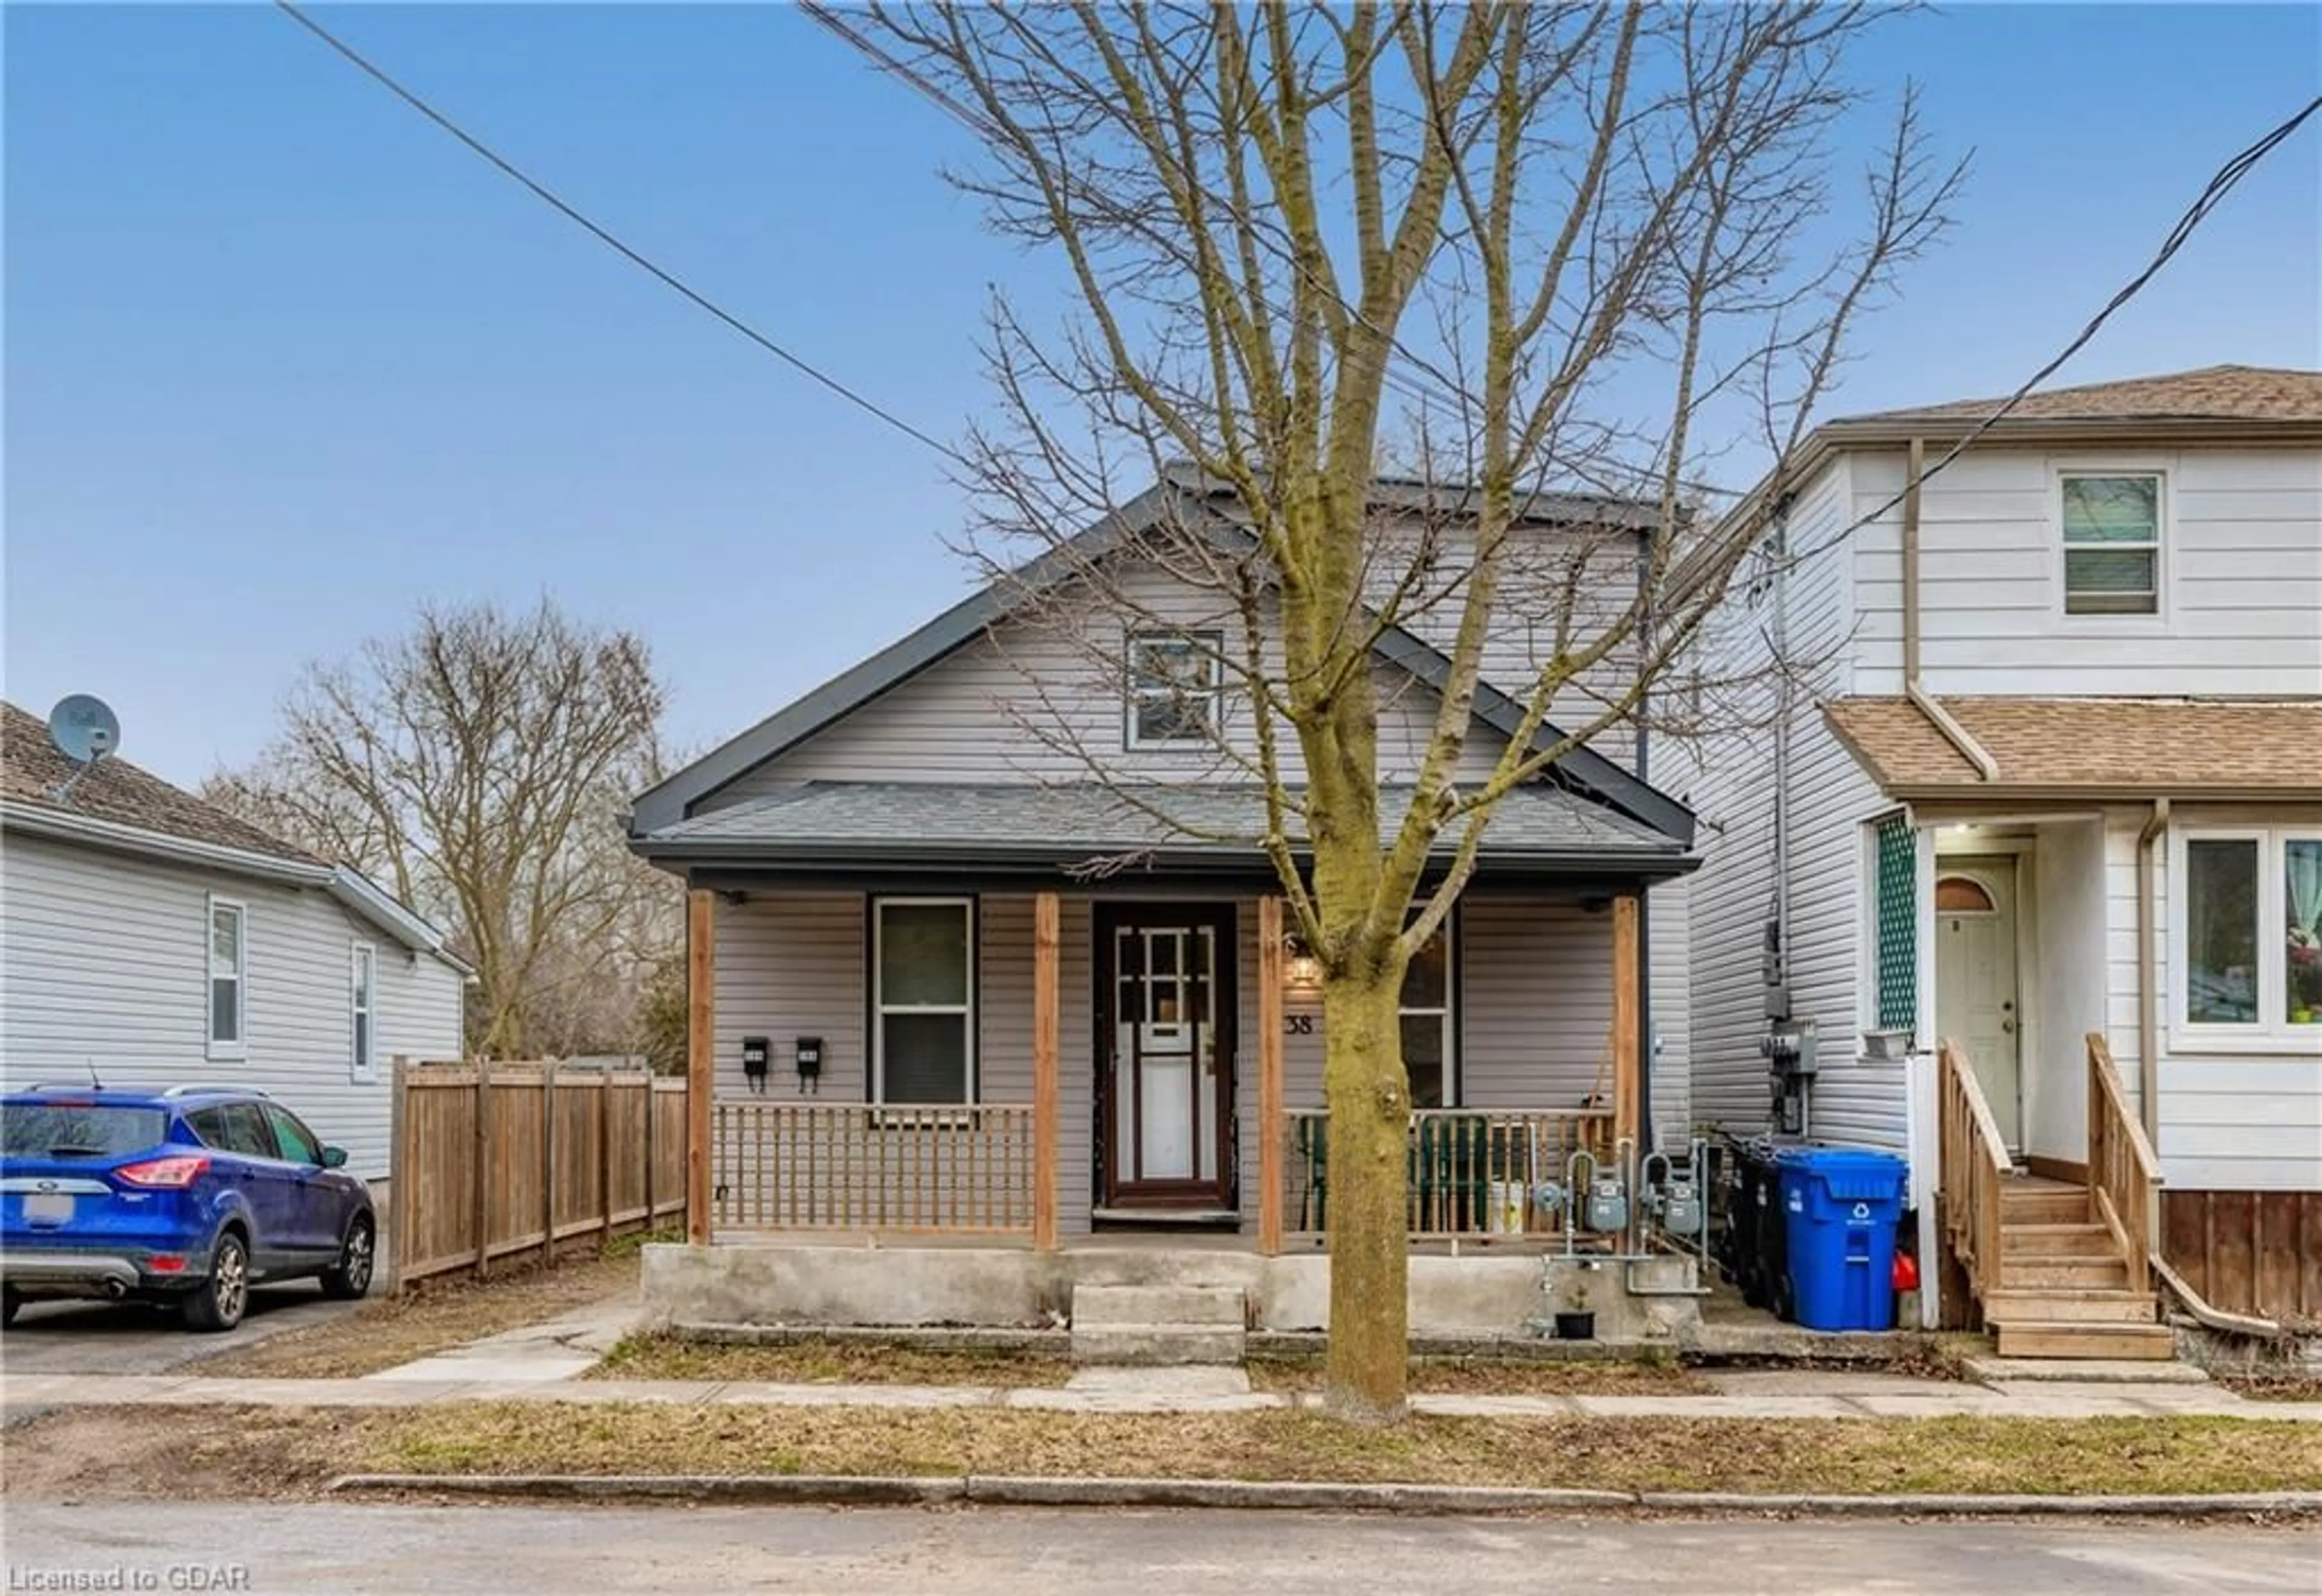 Frontside or backside of a home for 38 Huron St, Guelph Ontario N1H 5Y2